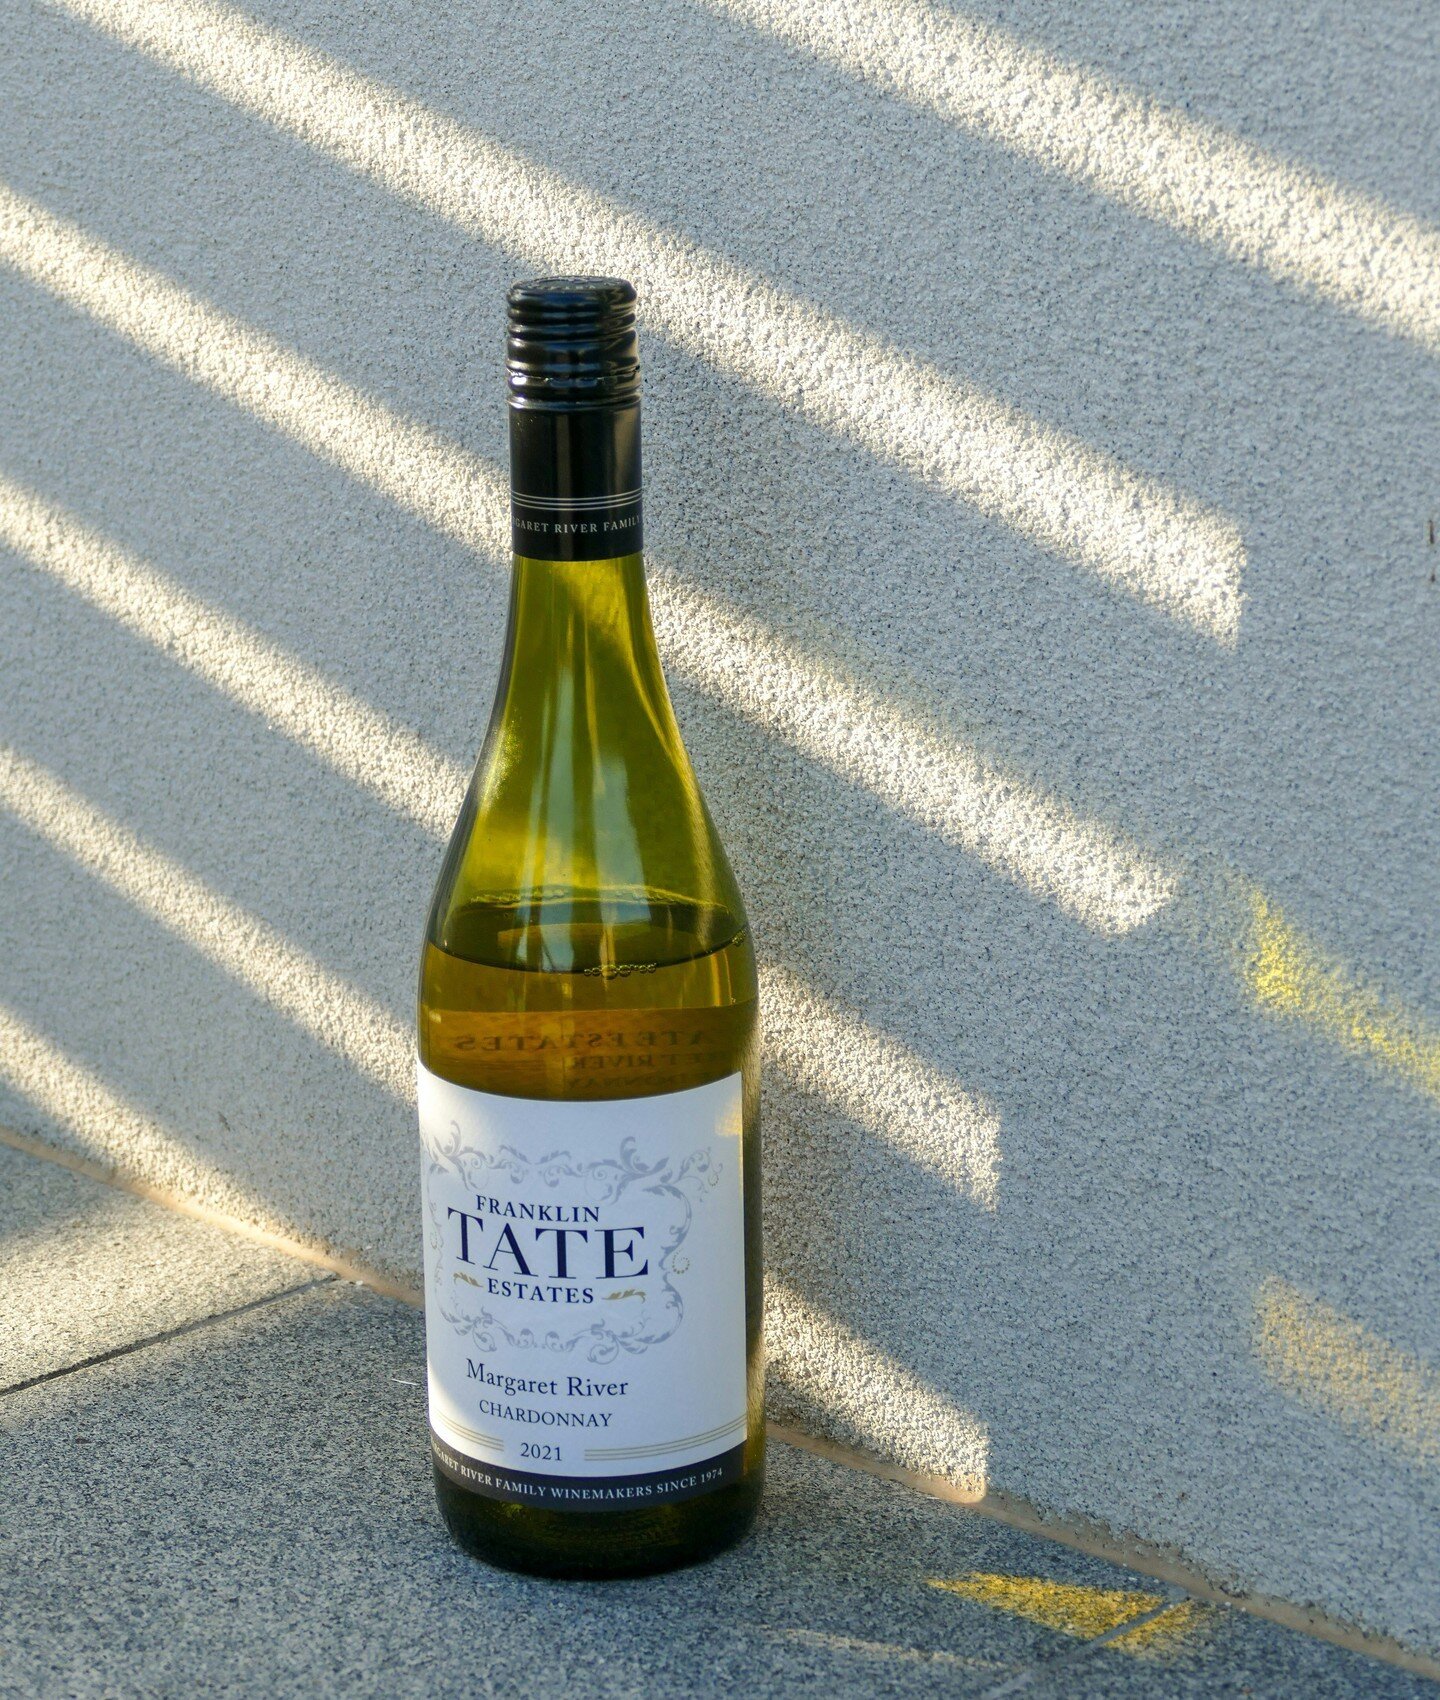 Franklin Tate Estate Chardonnay has a creamy texture of white peach and nectarine, with melon cashews, hints of spice all complimented by the balanced acidity.